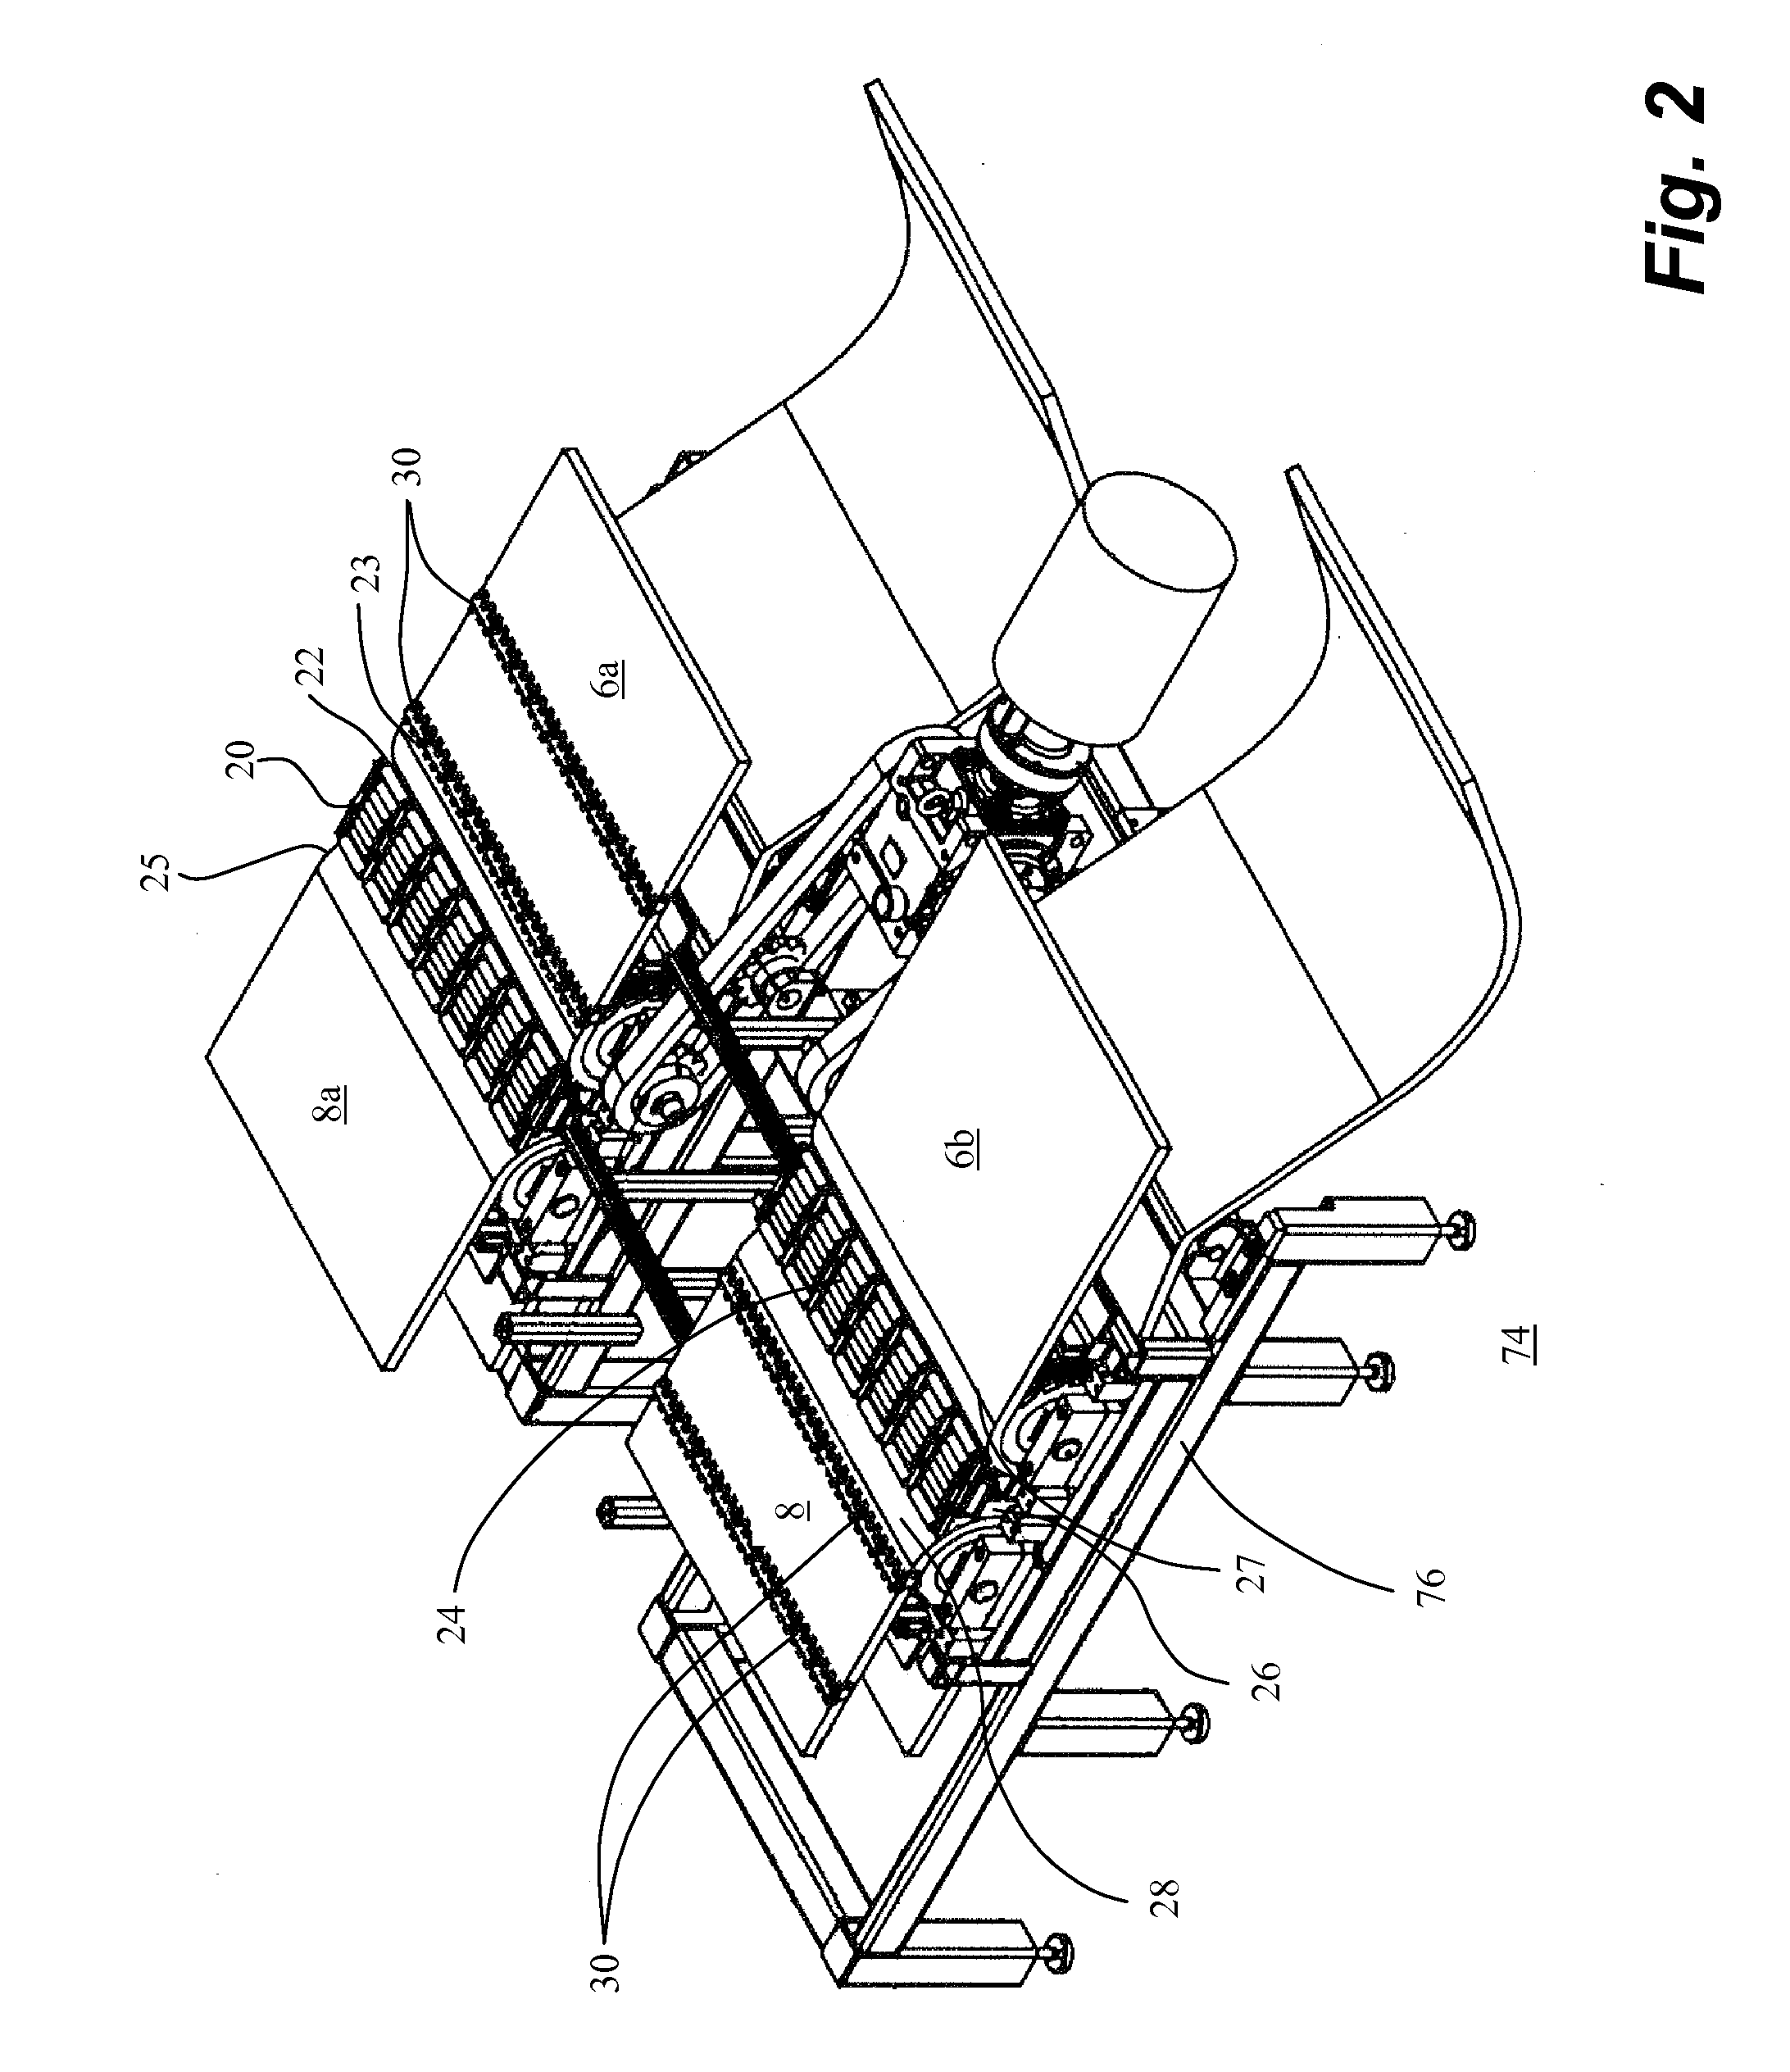 Apparatus, system and method for moving a vehicle from dual belt conveyor to dual belt conveyor